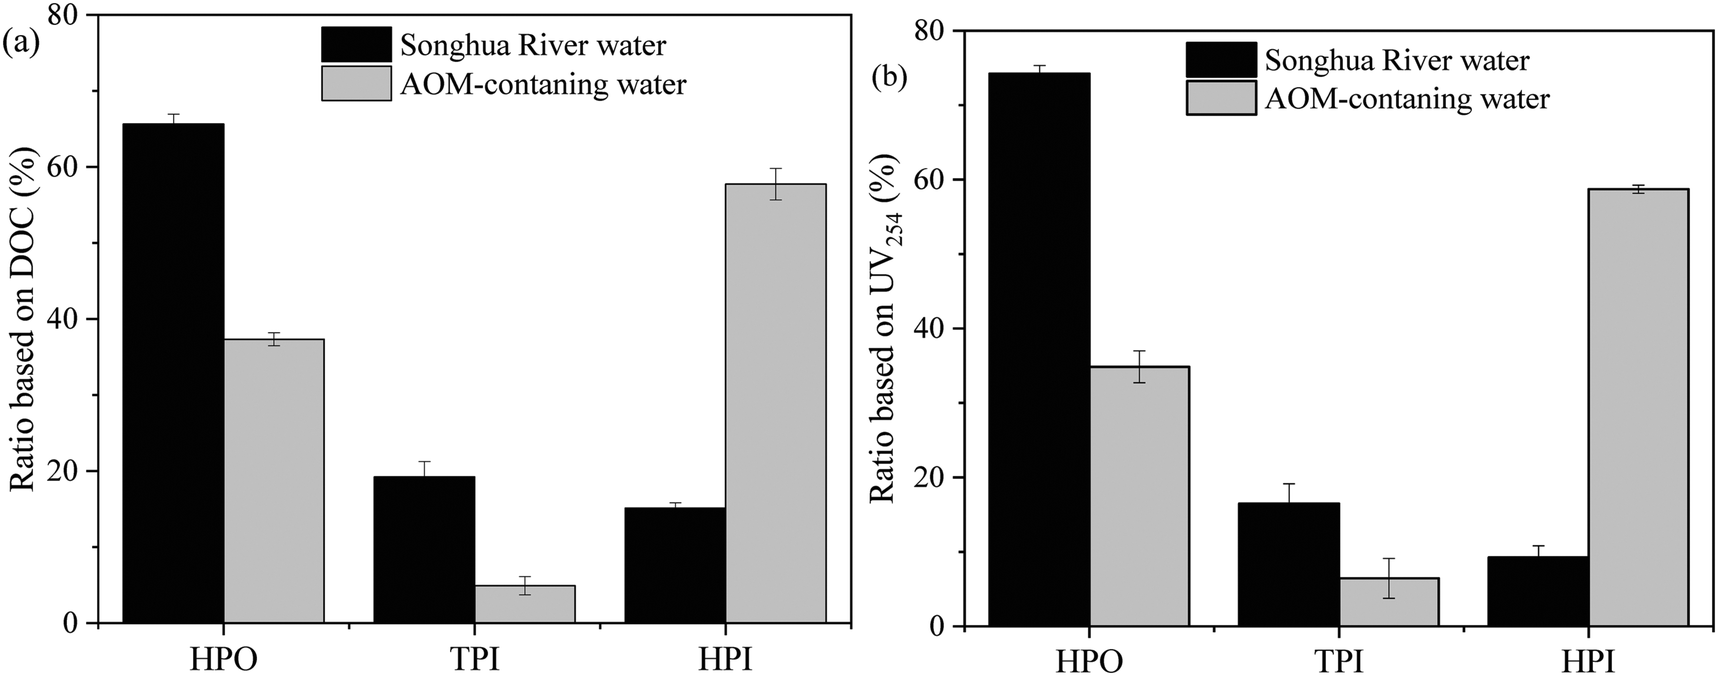 Membrane fouling in an integrated adsorption–UF system: effects of NOM and  adsorbent properties - Environmental Science: Water Research & Technology  (RSC Publishing) DOI:10.1039/C9EW00843H